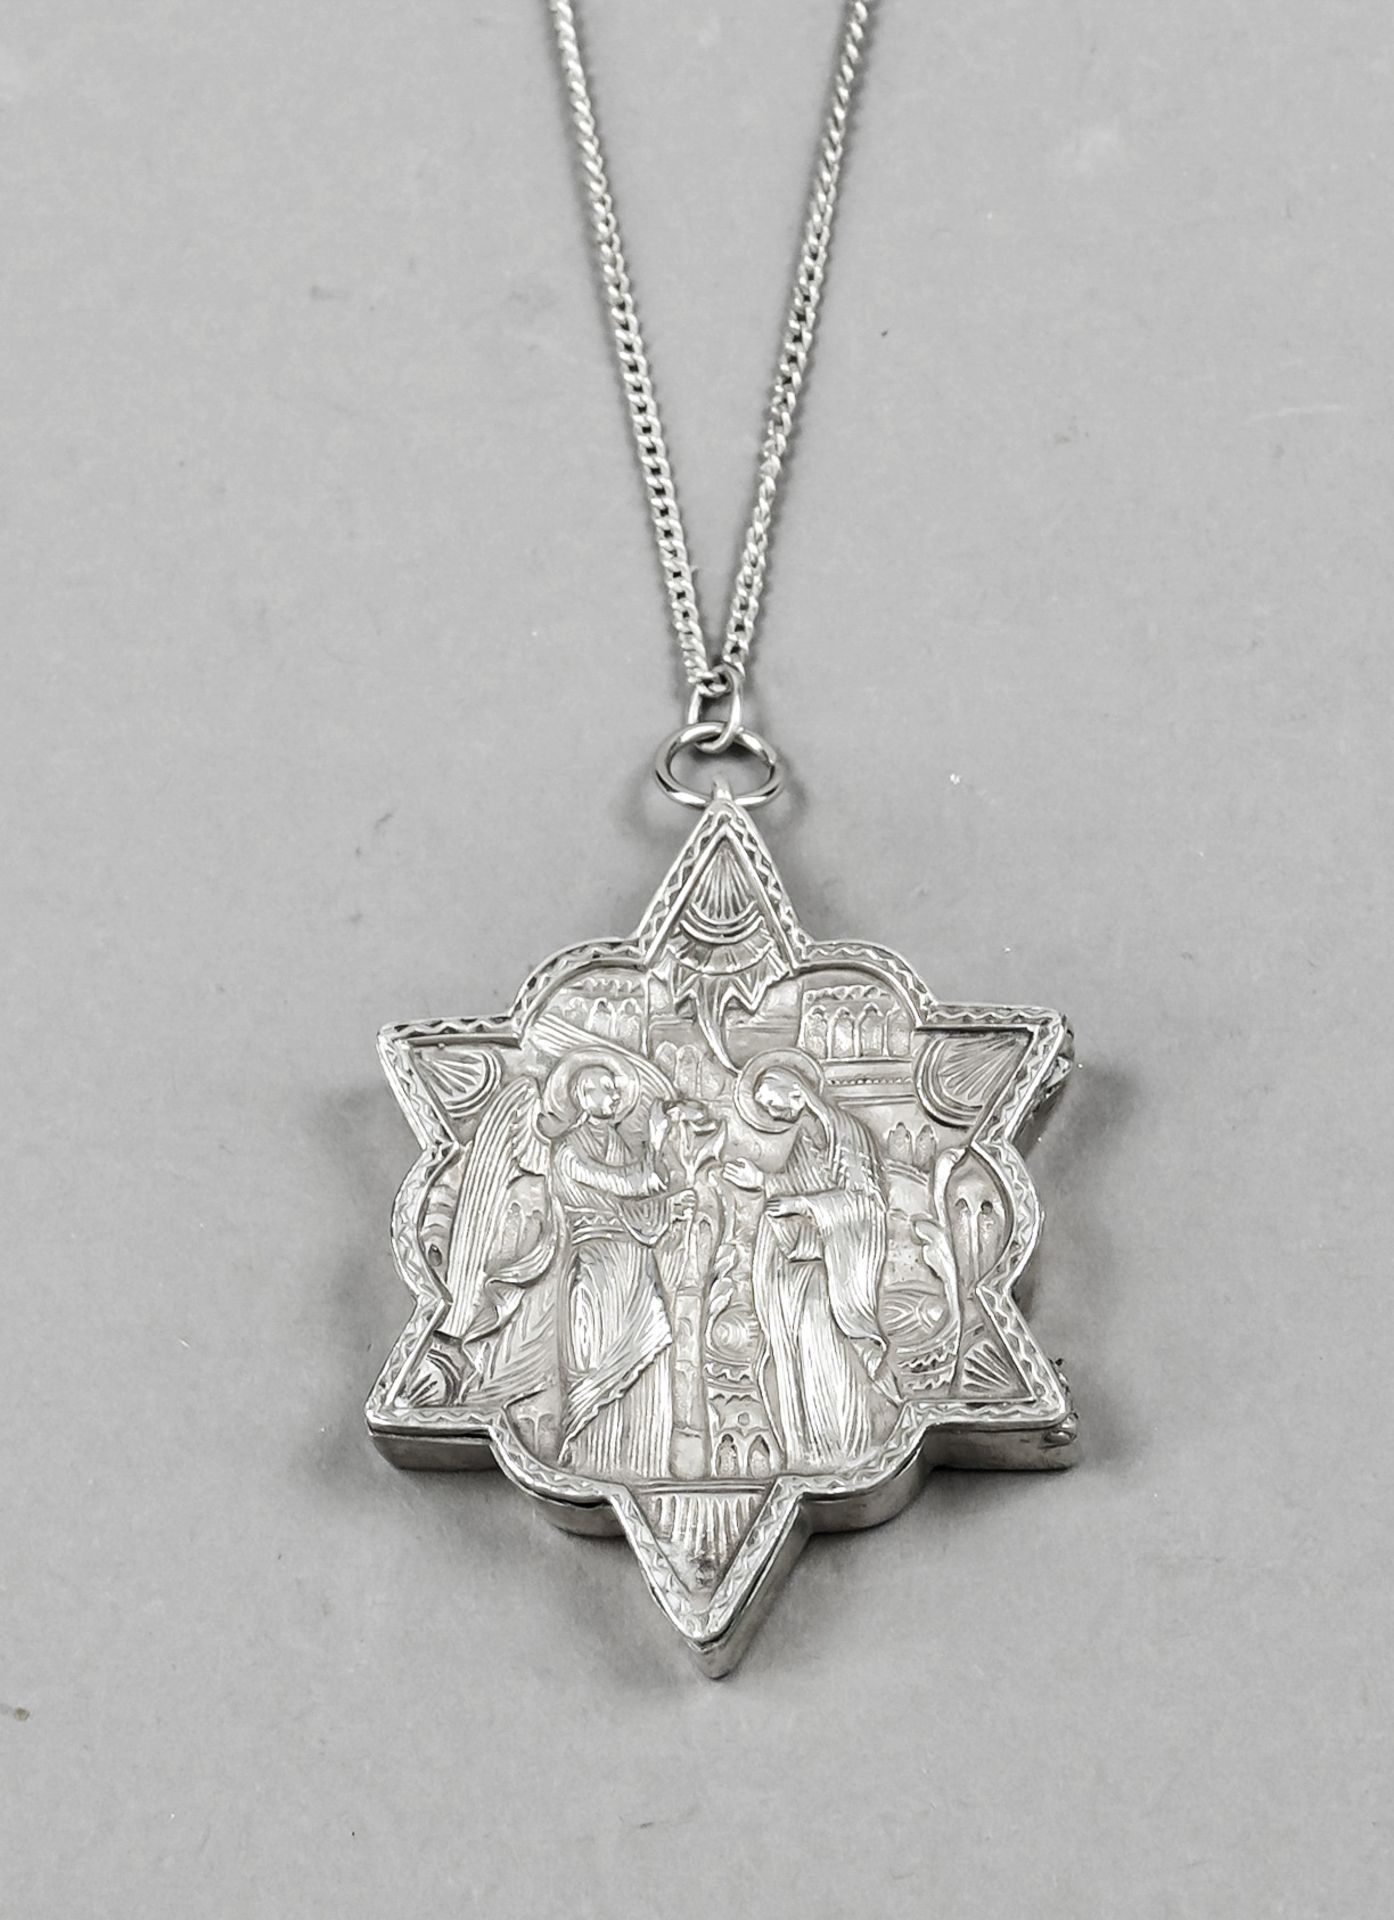 Star-shaped medallion, 19th century, silver tested, hinged, front with sacral, figurative relief